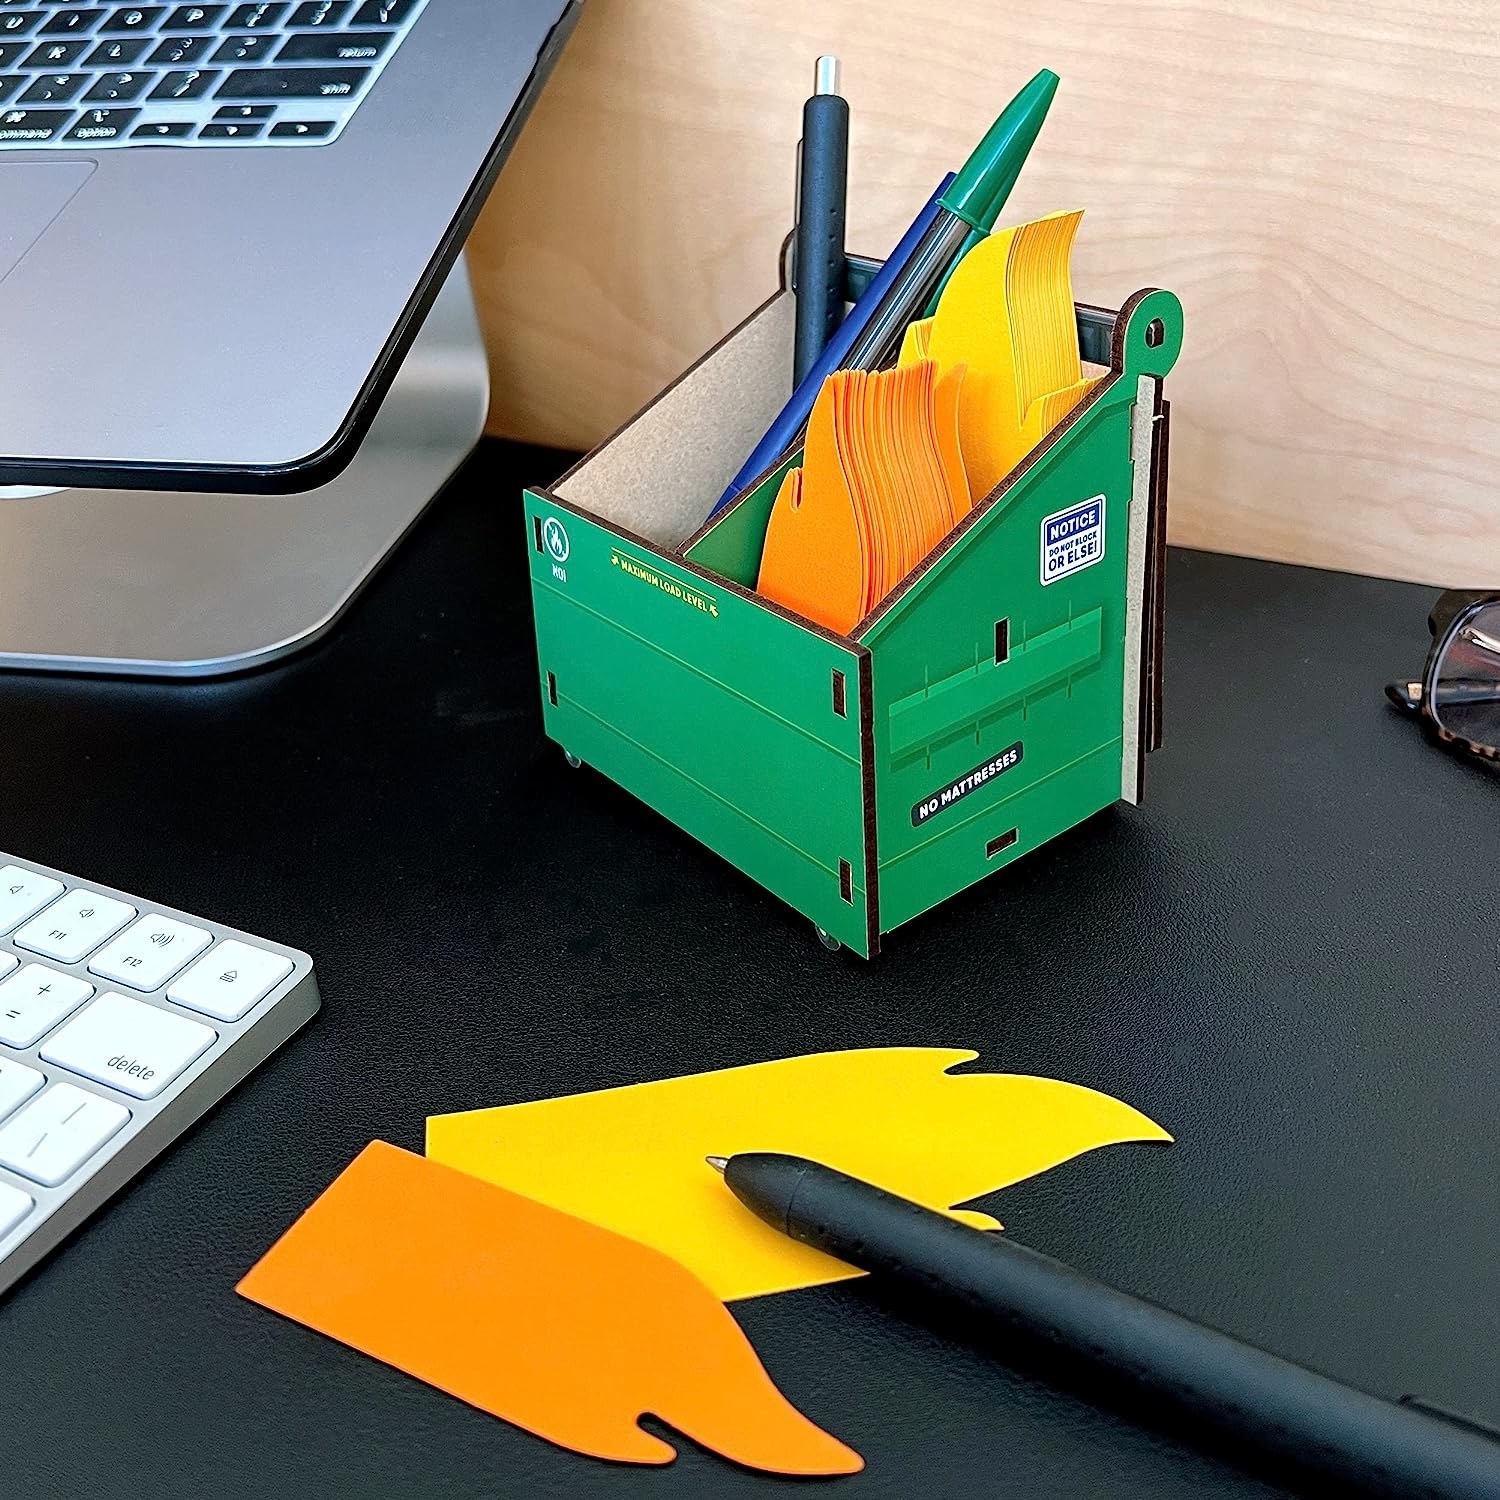 a dumpster shaped desk organizer filled with flame shaped note cards